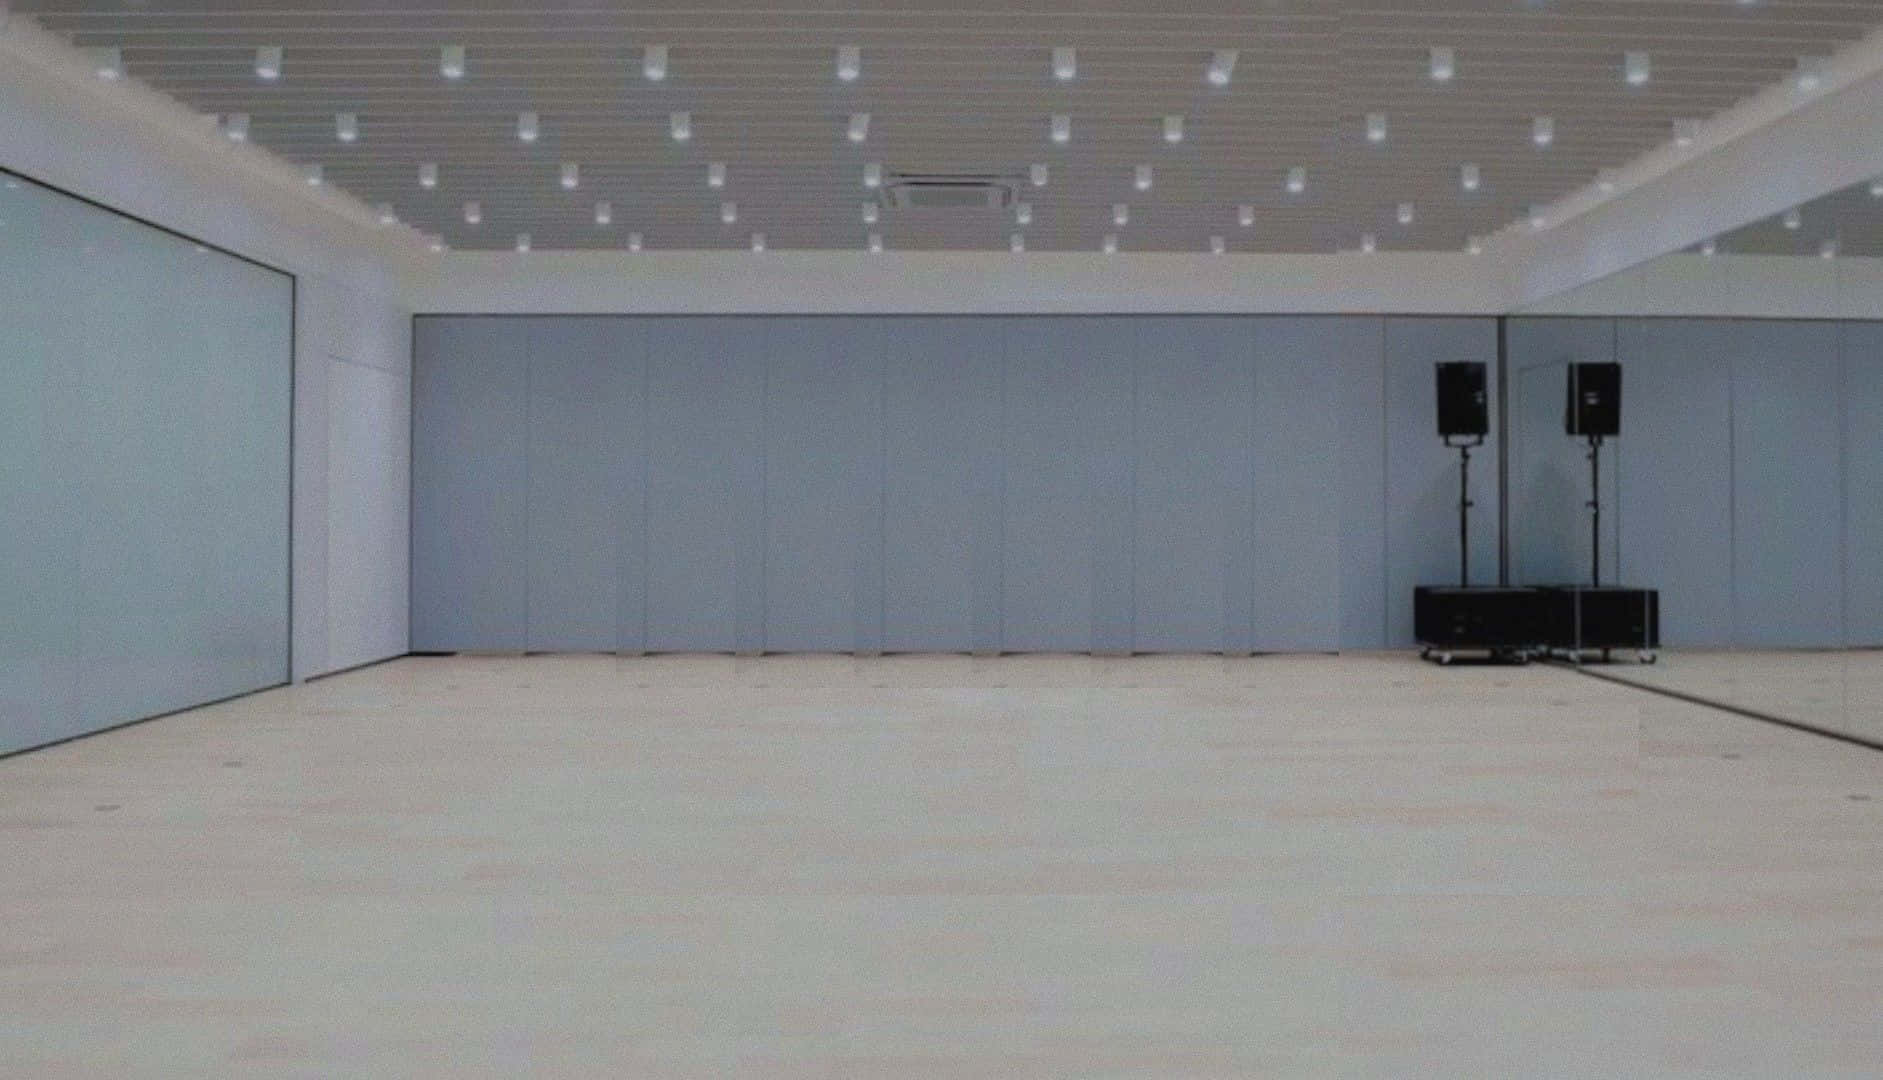 A Large Room With White Walls And A White Ceiling